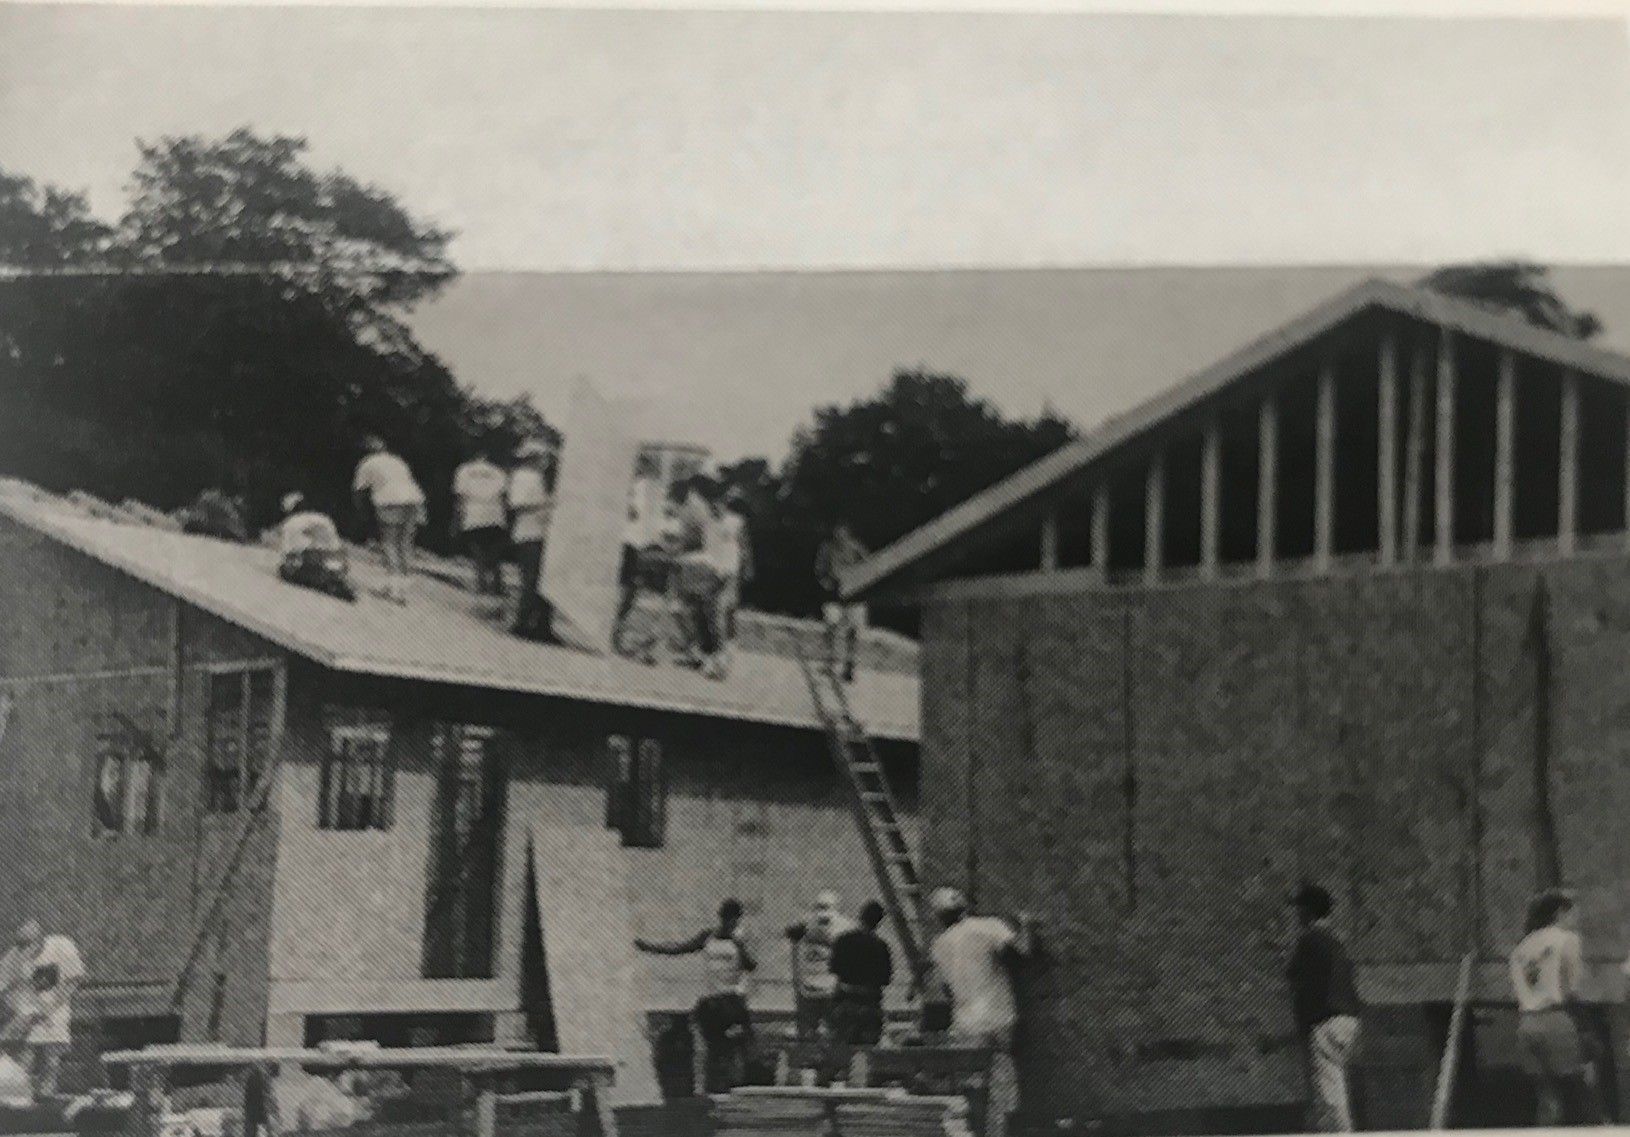 1997 – Two Homecoming houses are constructed at once.